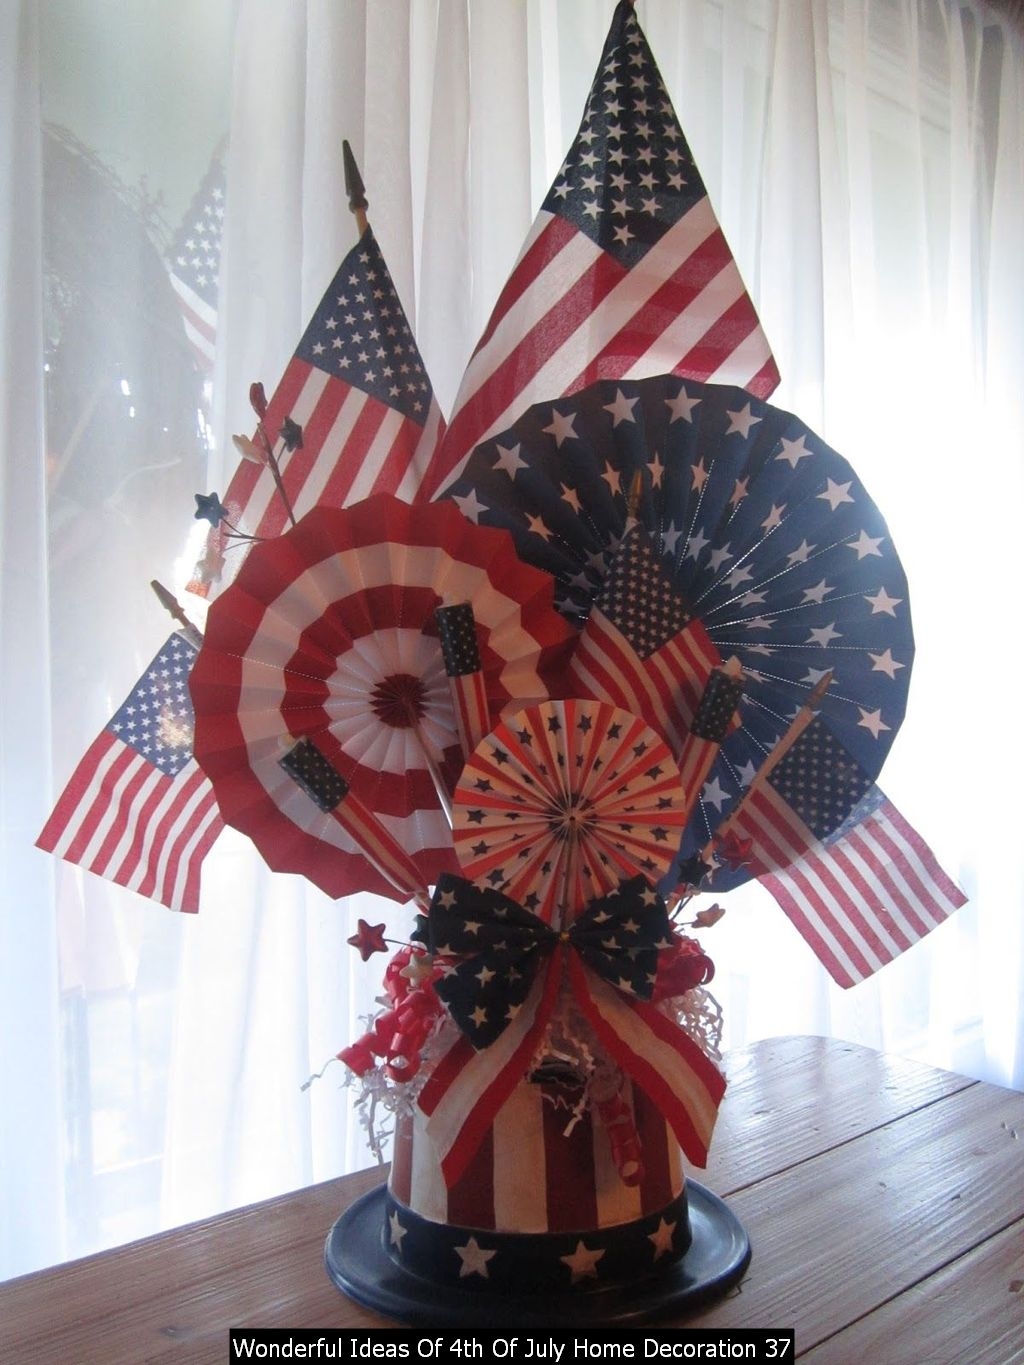 Wonderful Ideas Of 4th Of July Home Decoration 37